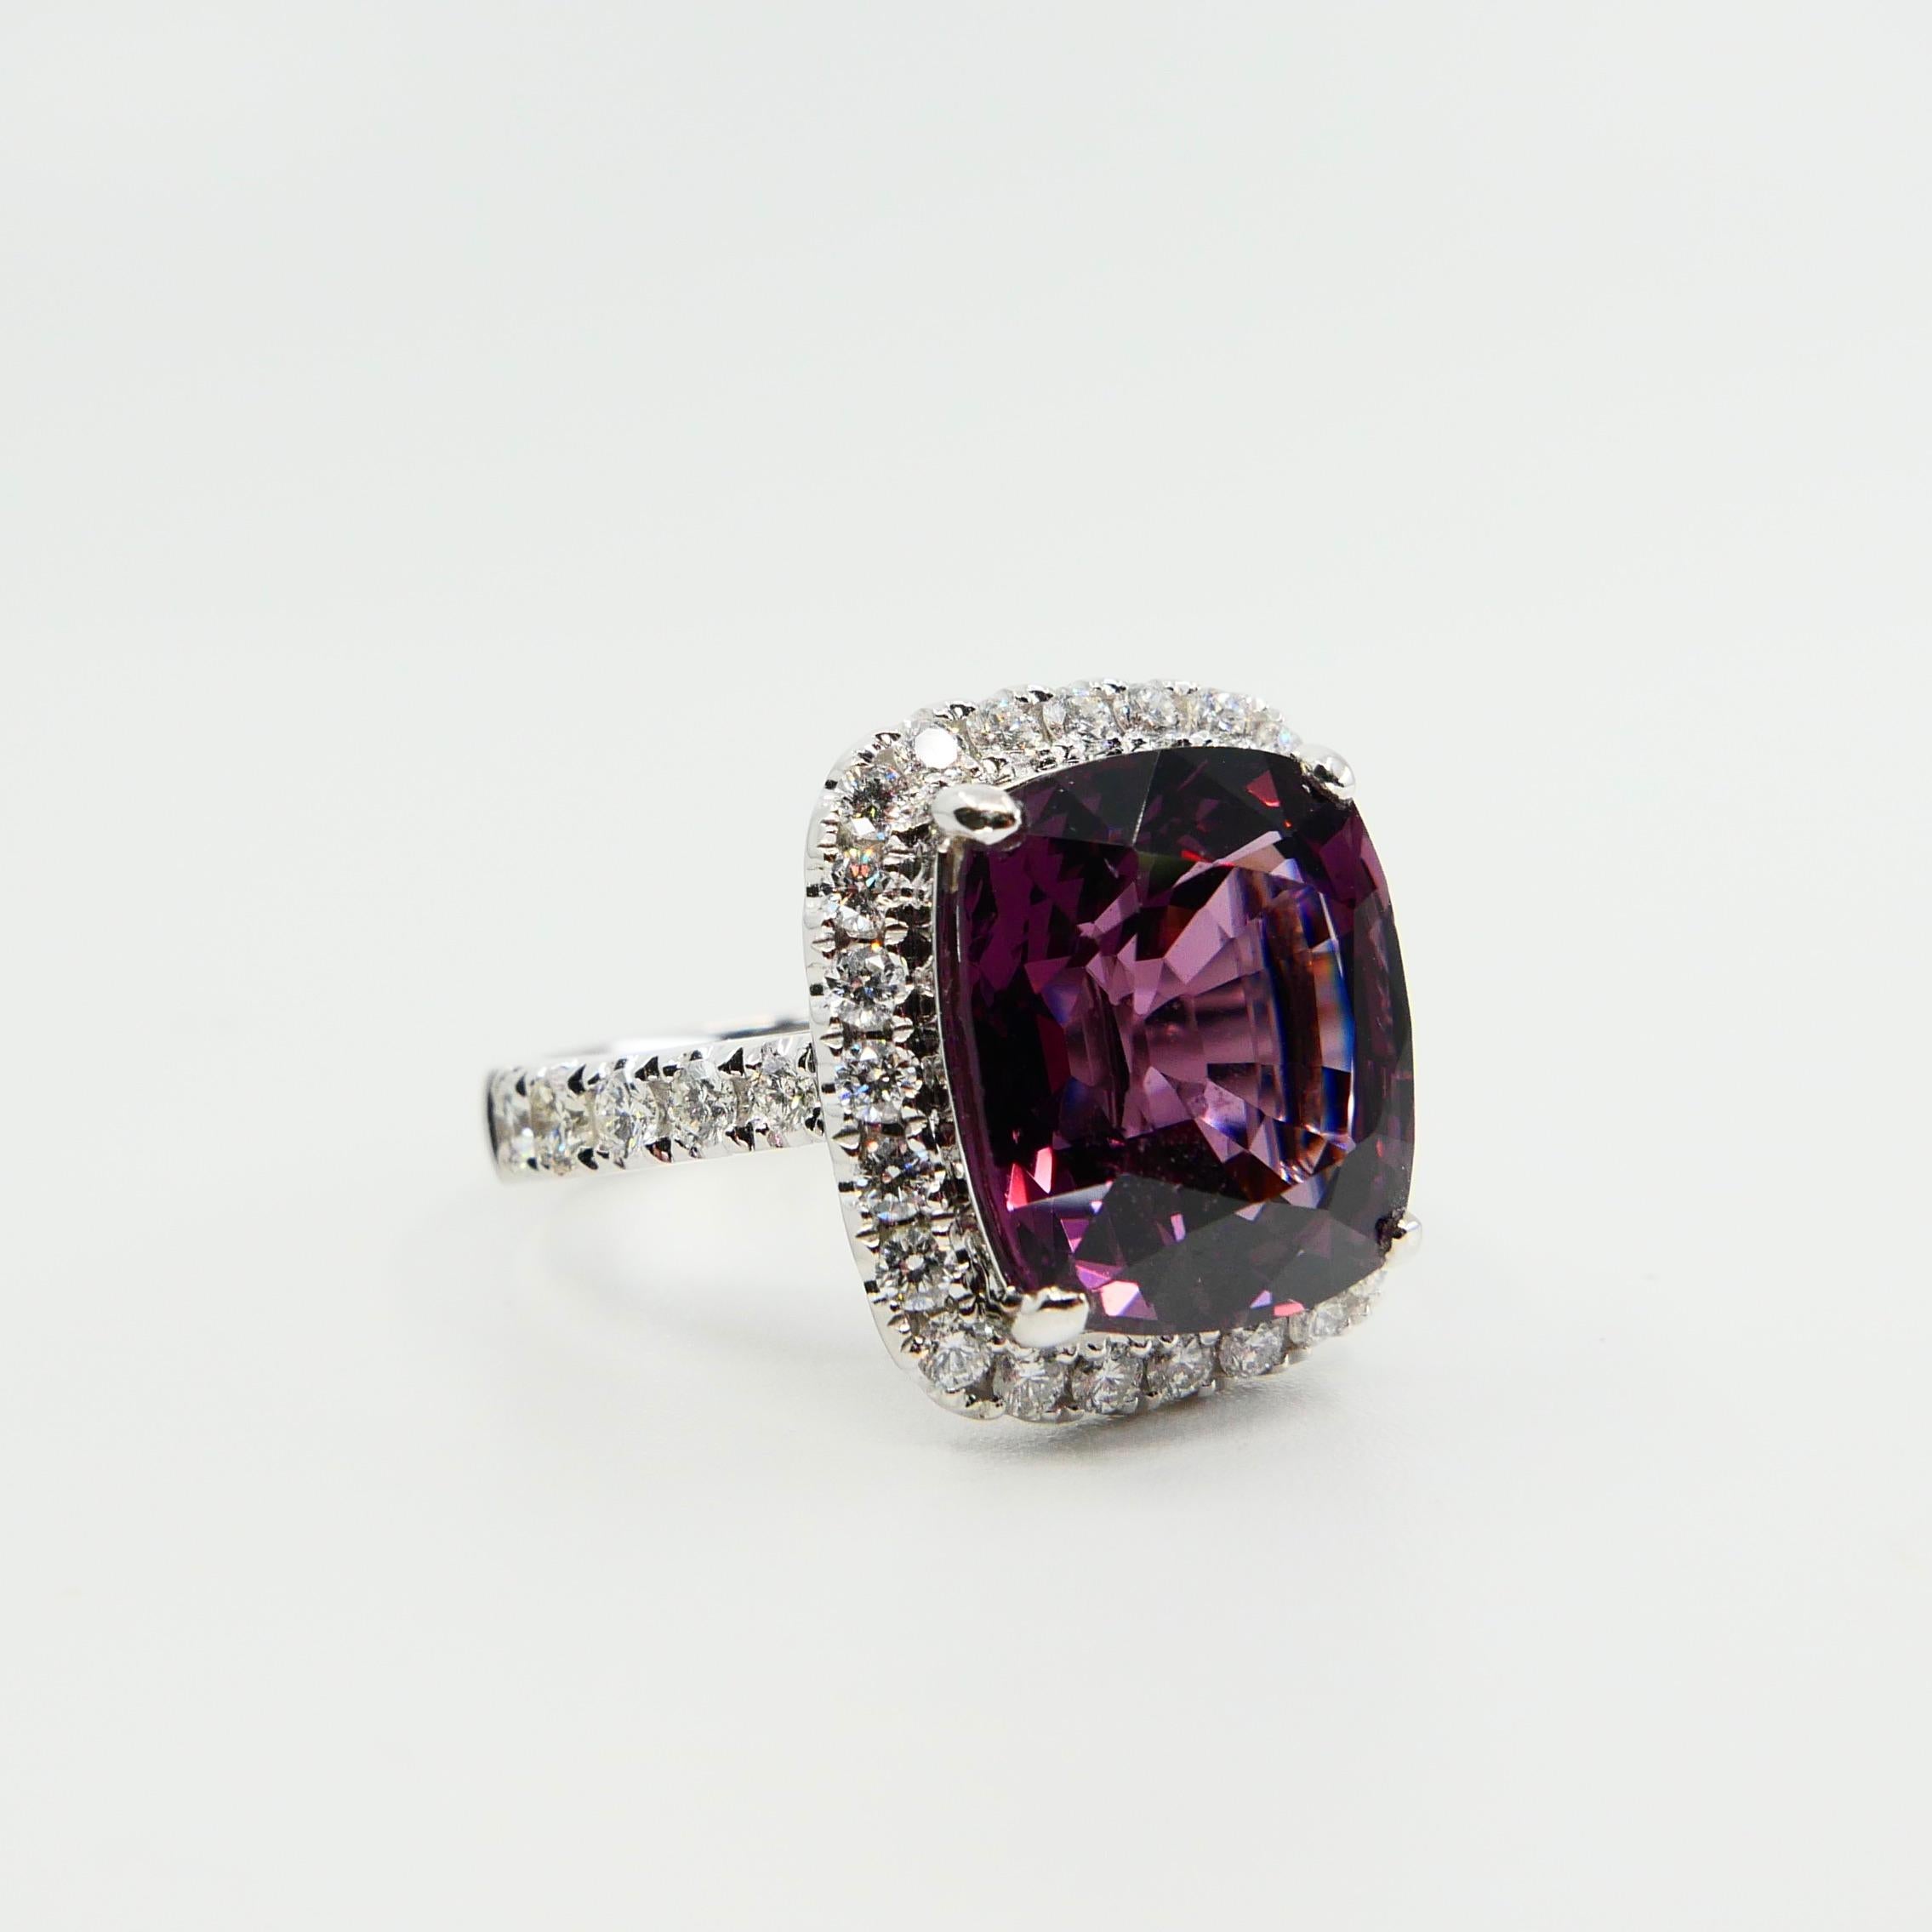 Certified Natural 9.18 Carat Vivid Purple No Heat Spinel & Diamond Cocktail Ring For Sale 6